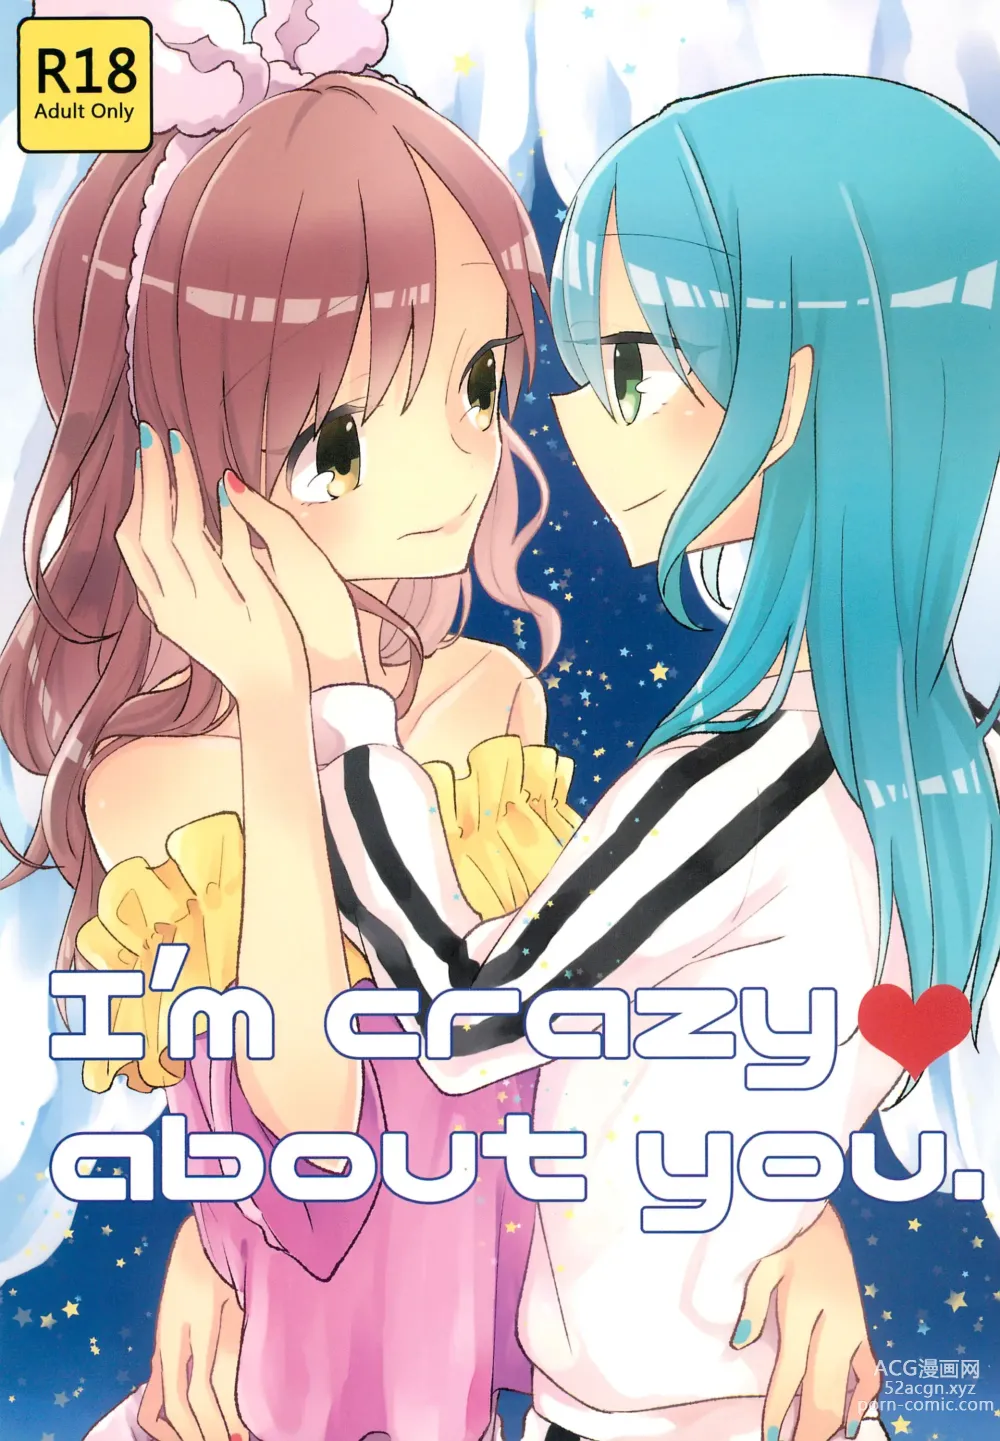 Page 1 of doujinshi I’m crazy about you.